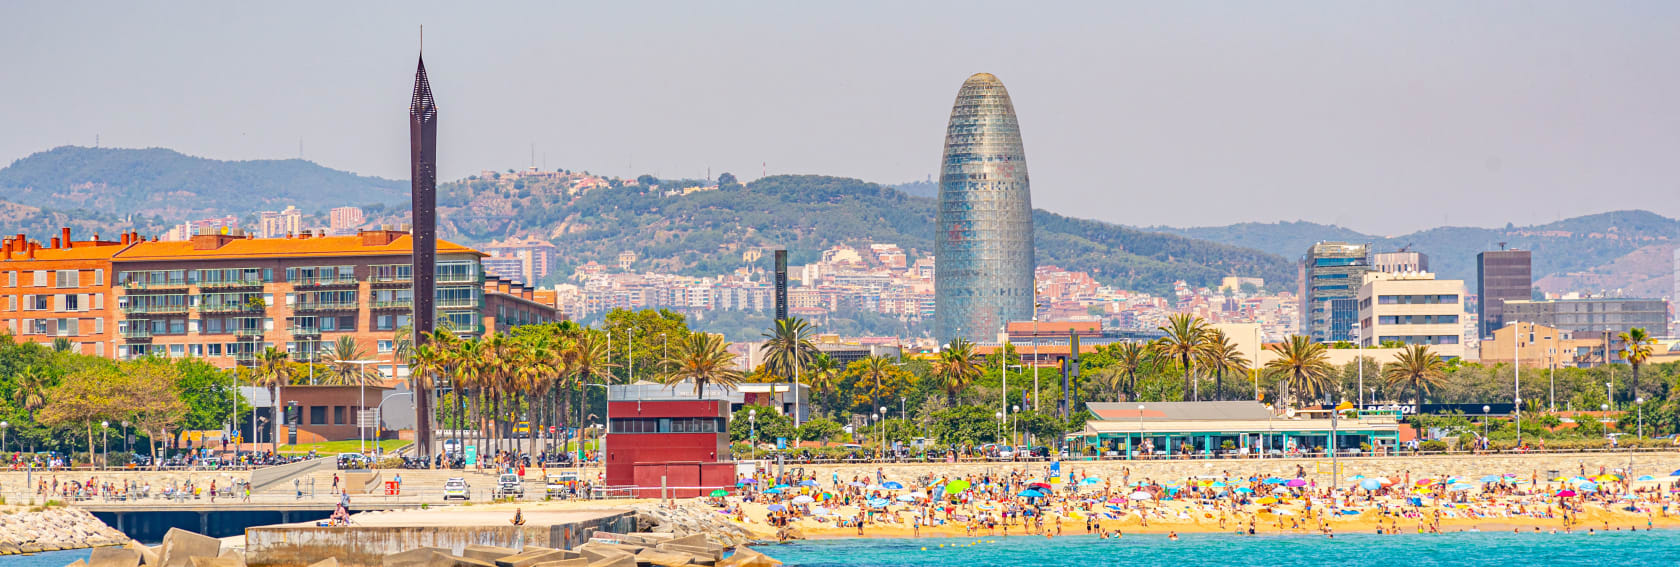 View of the beach in Barcelona, Spain.